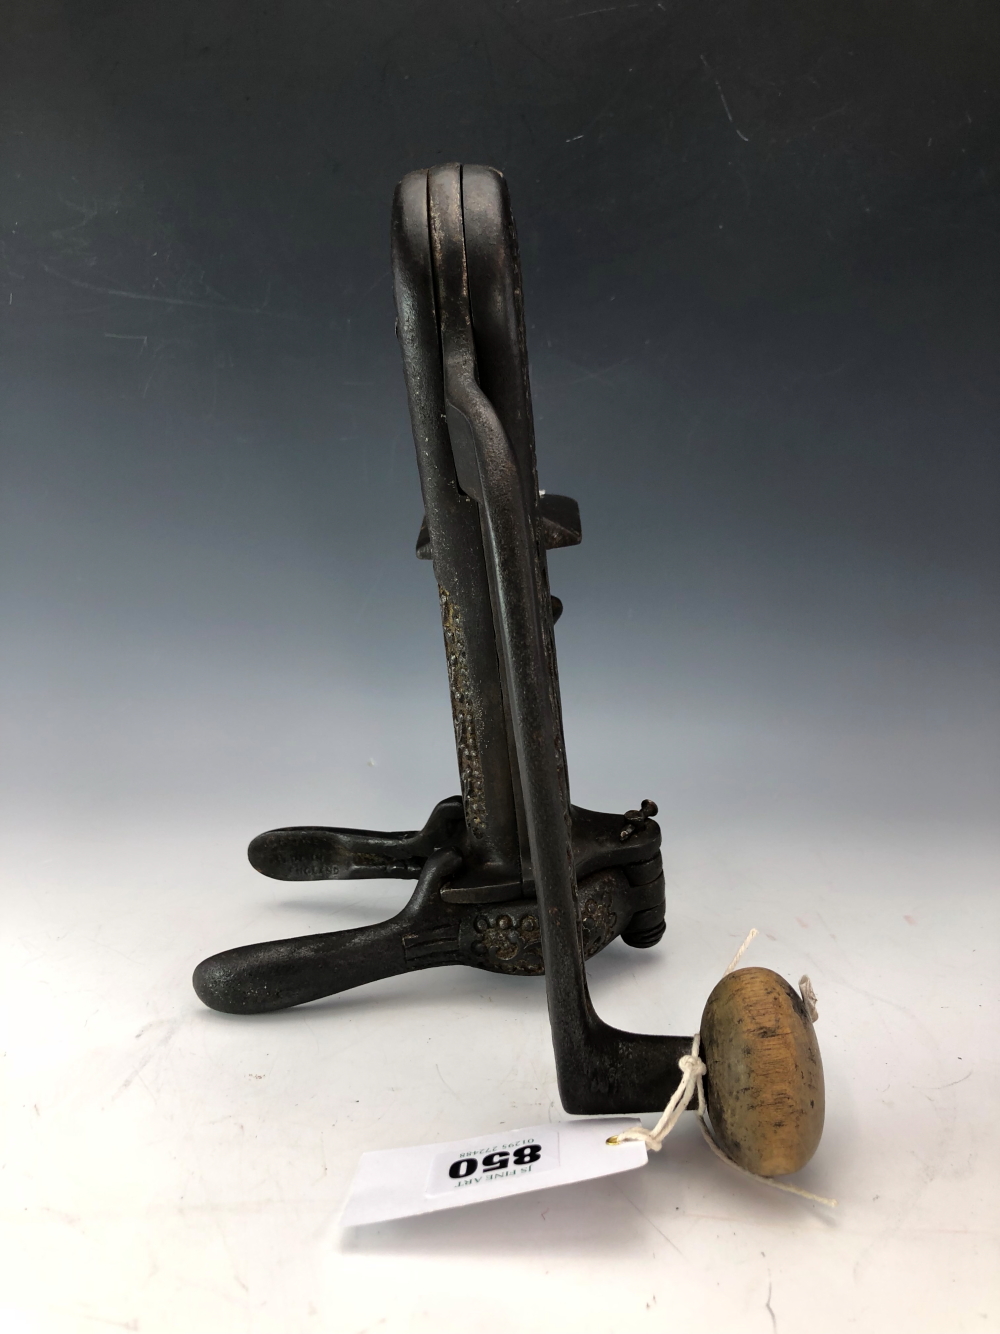 A VICTORIAN TABLE CLAMPING IRON CORKSCREW OPERATED BY A SUBSTANTIAL LEVER ARM - Image 4 of 5